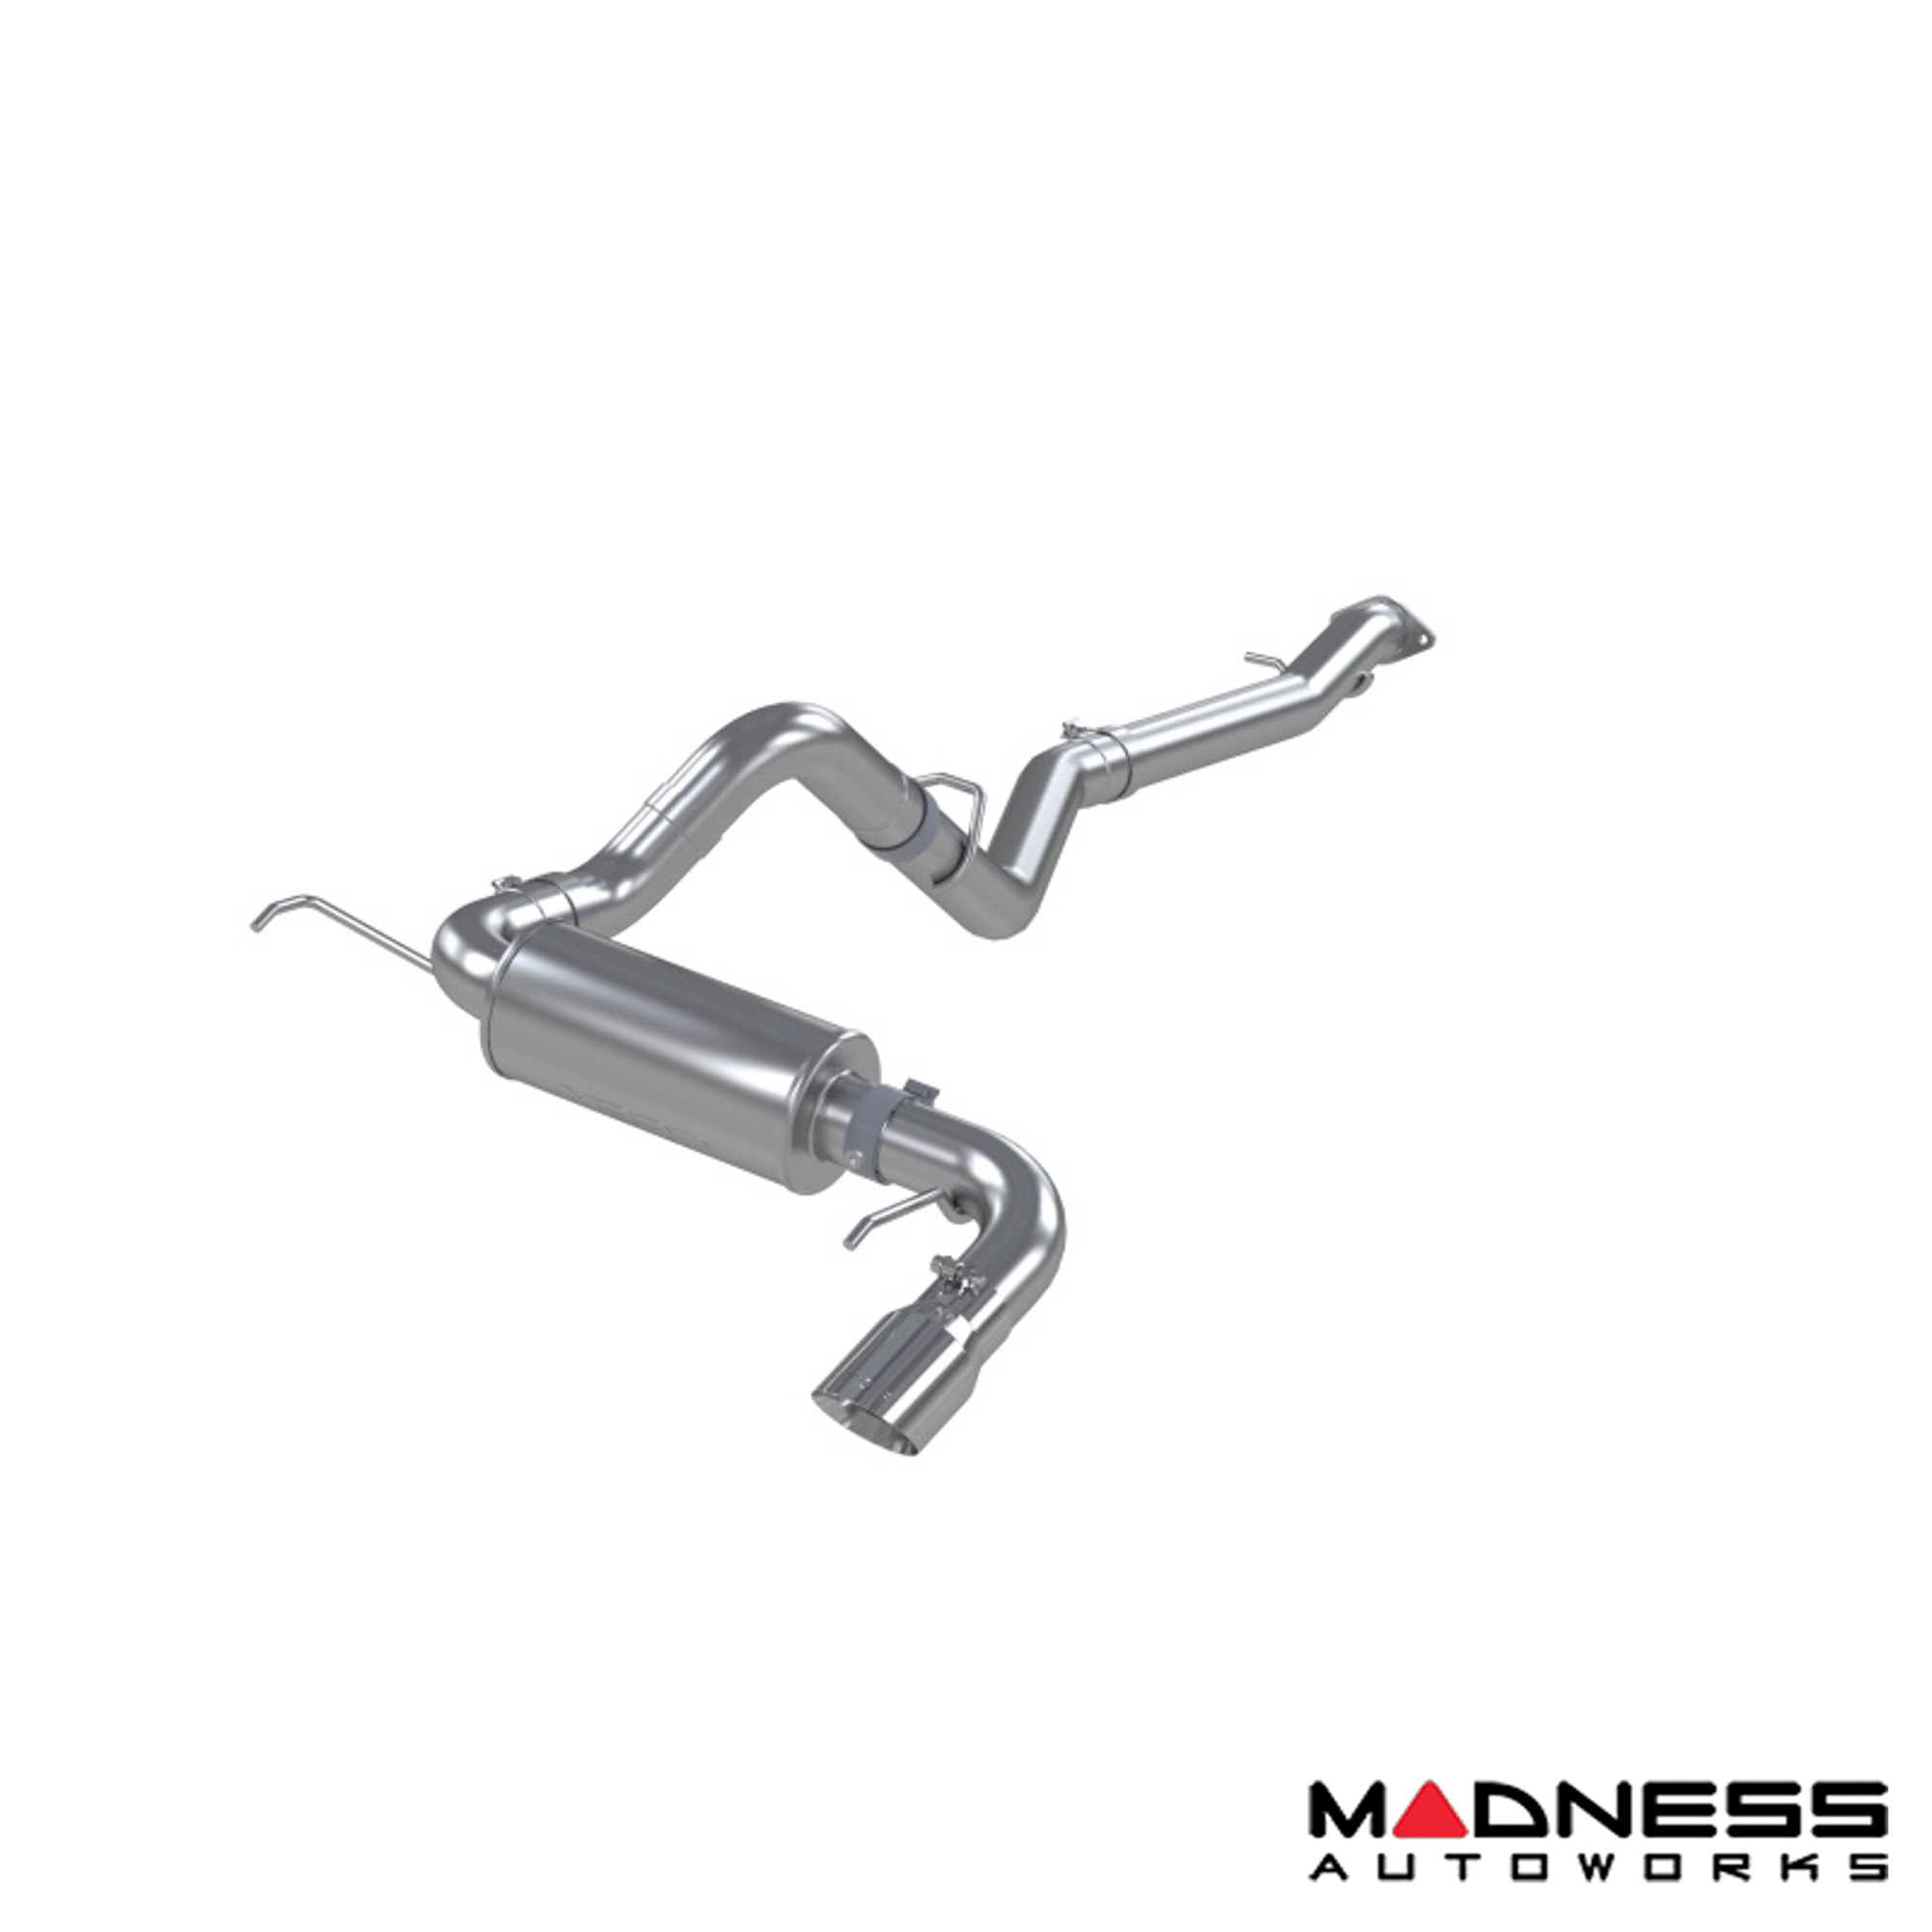 Ford Bronco Performance Exhaust System - Cat Back - MBRP - 3" 